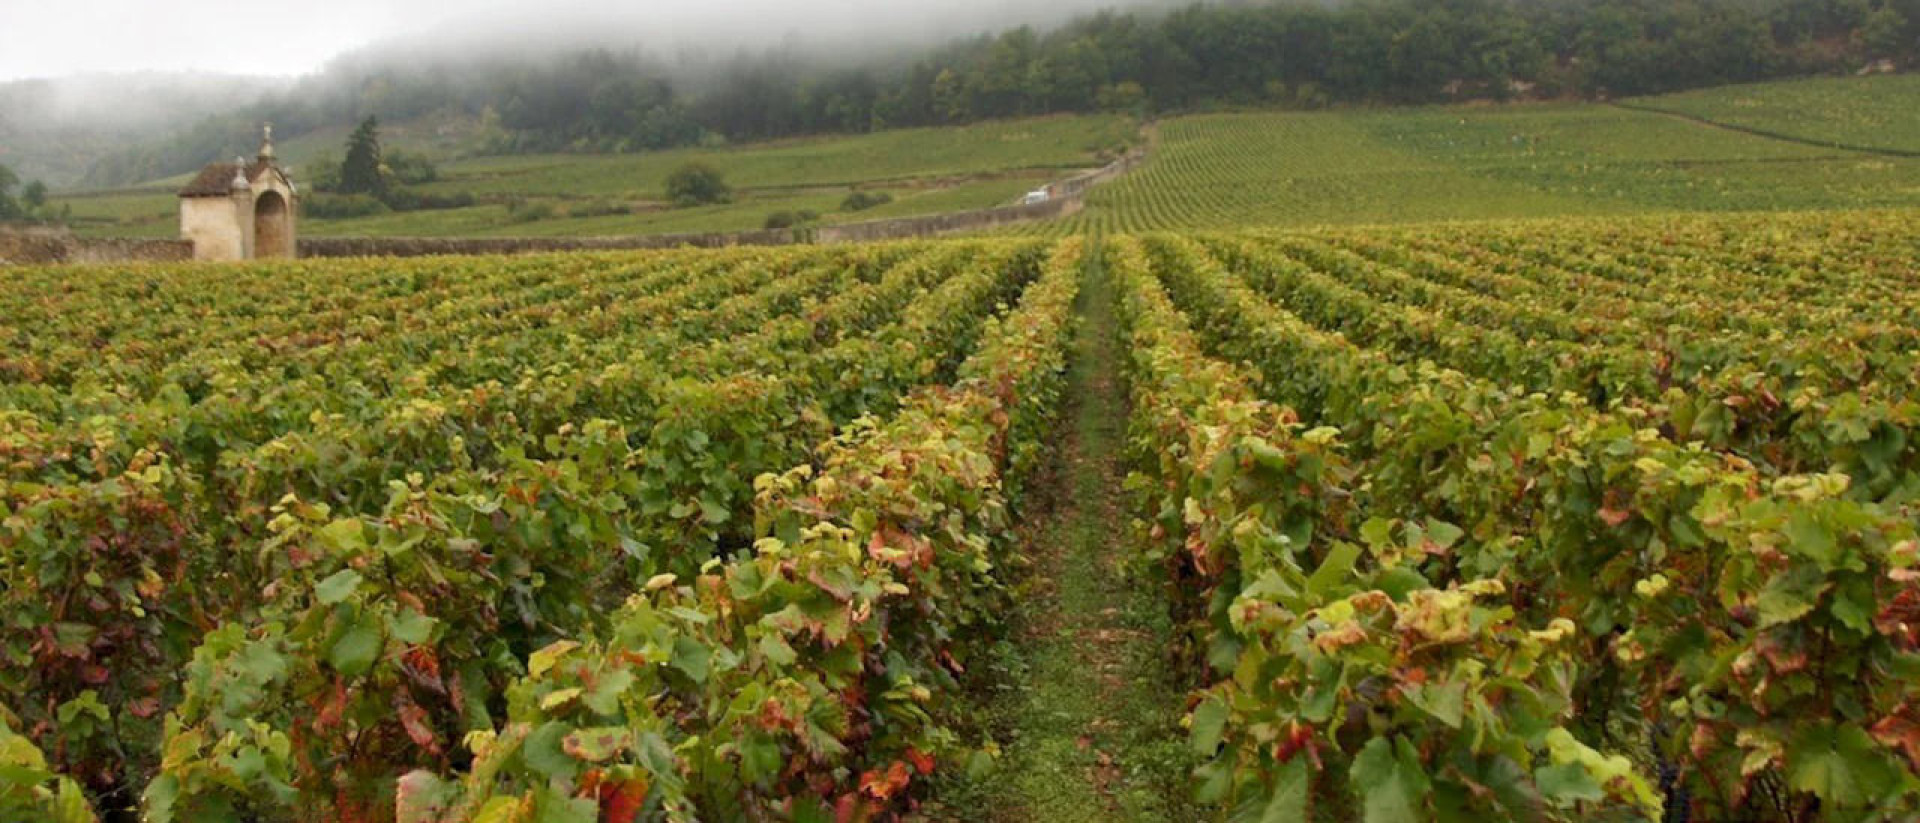 Interesting things about Domaine Fourrier you should definitely know about